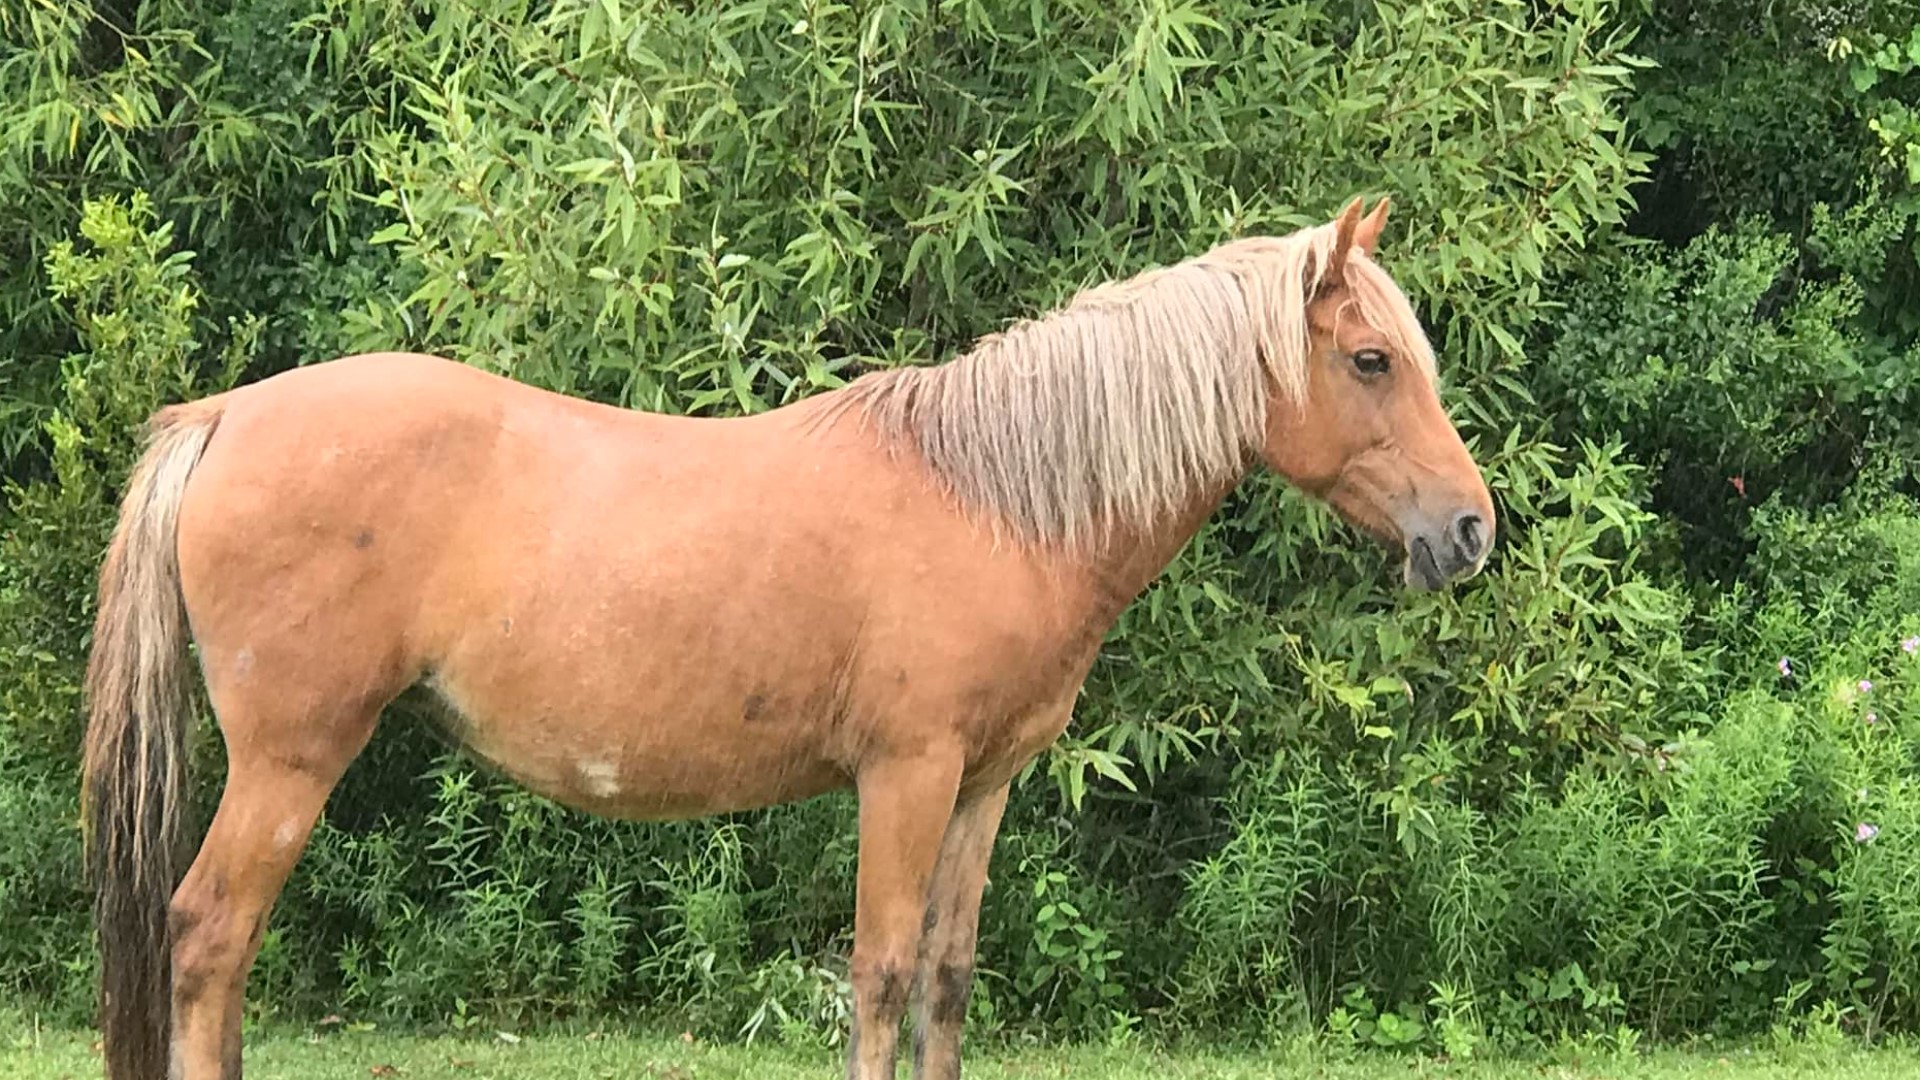 The Corolla Wild Horse Fund has stated that their 12-year-old wild mare Caroline tragically died after being in an altercation with a wild stallion.